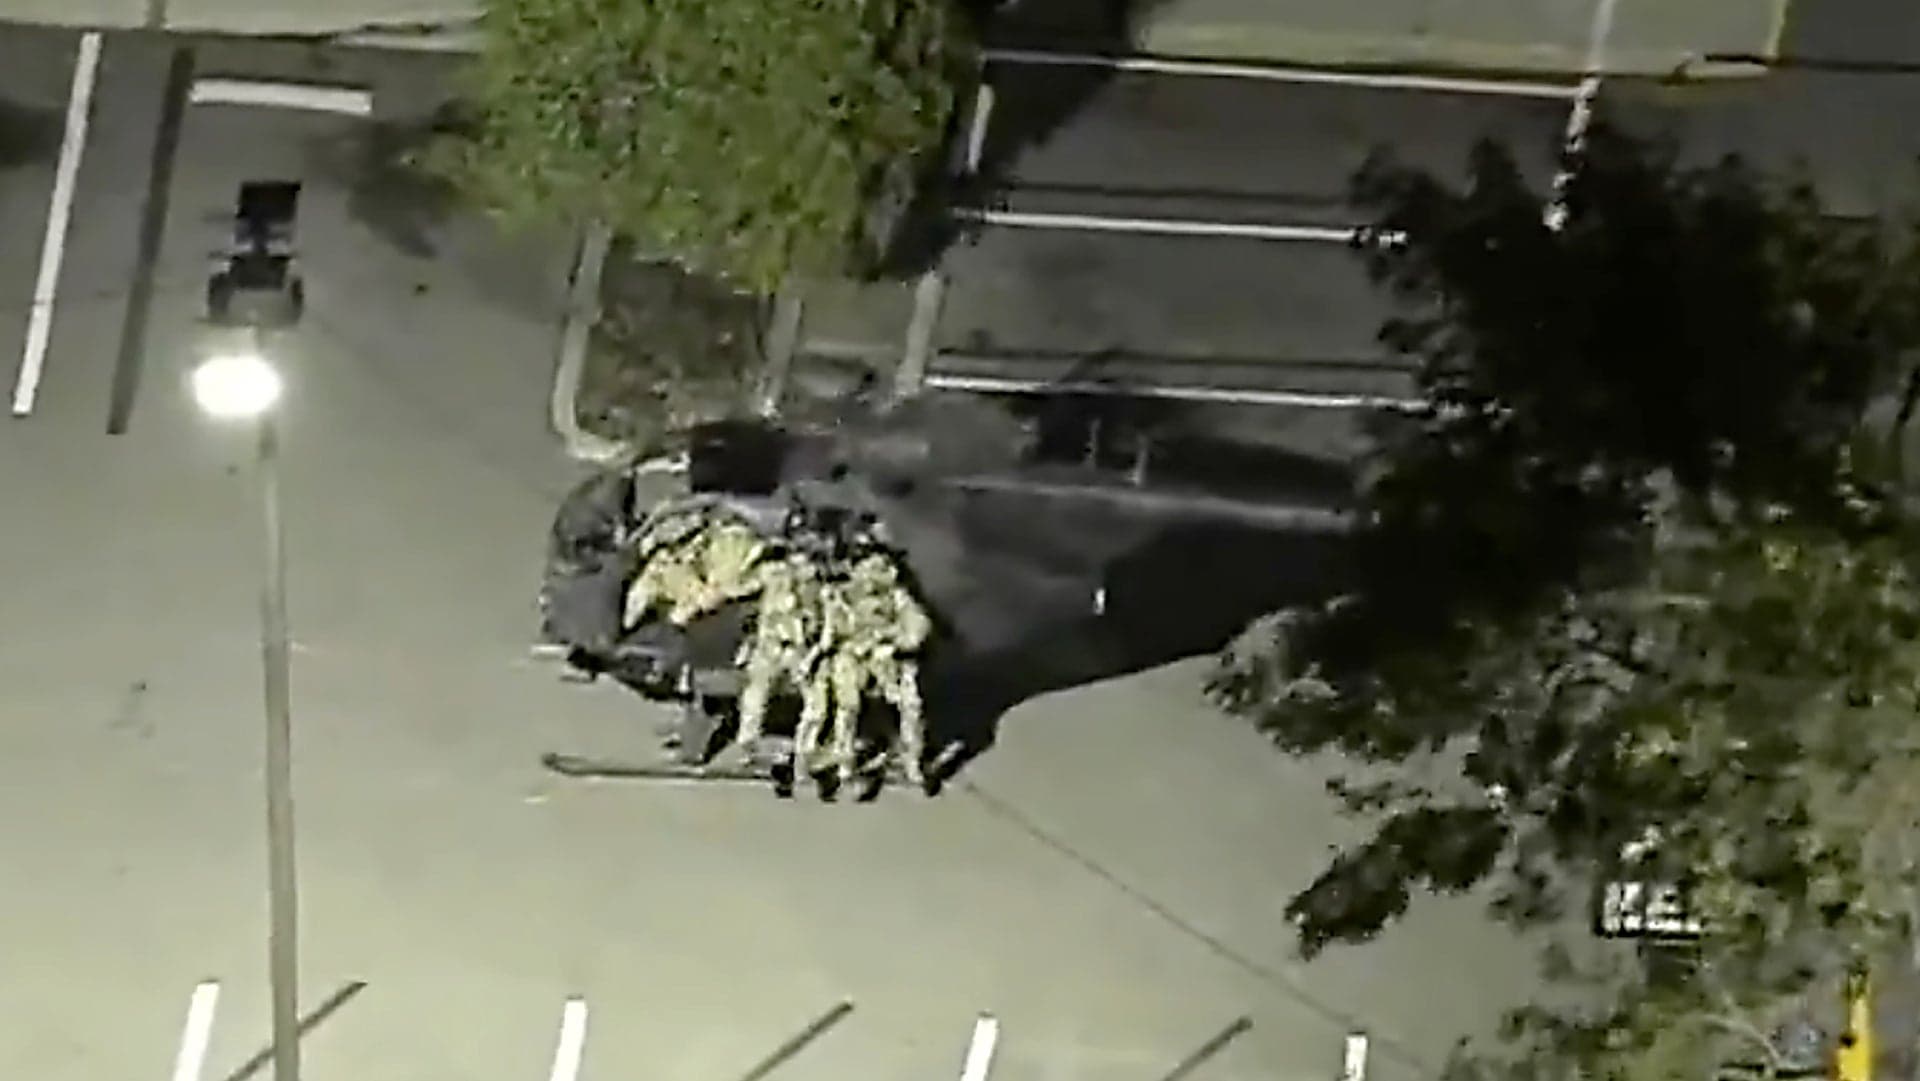 Watch Night Stalker Choppers Descend In Unison Into Small Parking Lot Near Staples Center